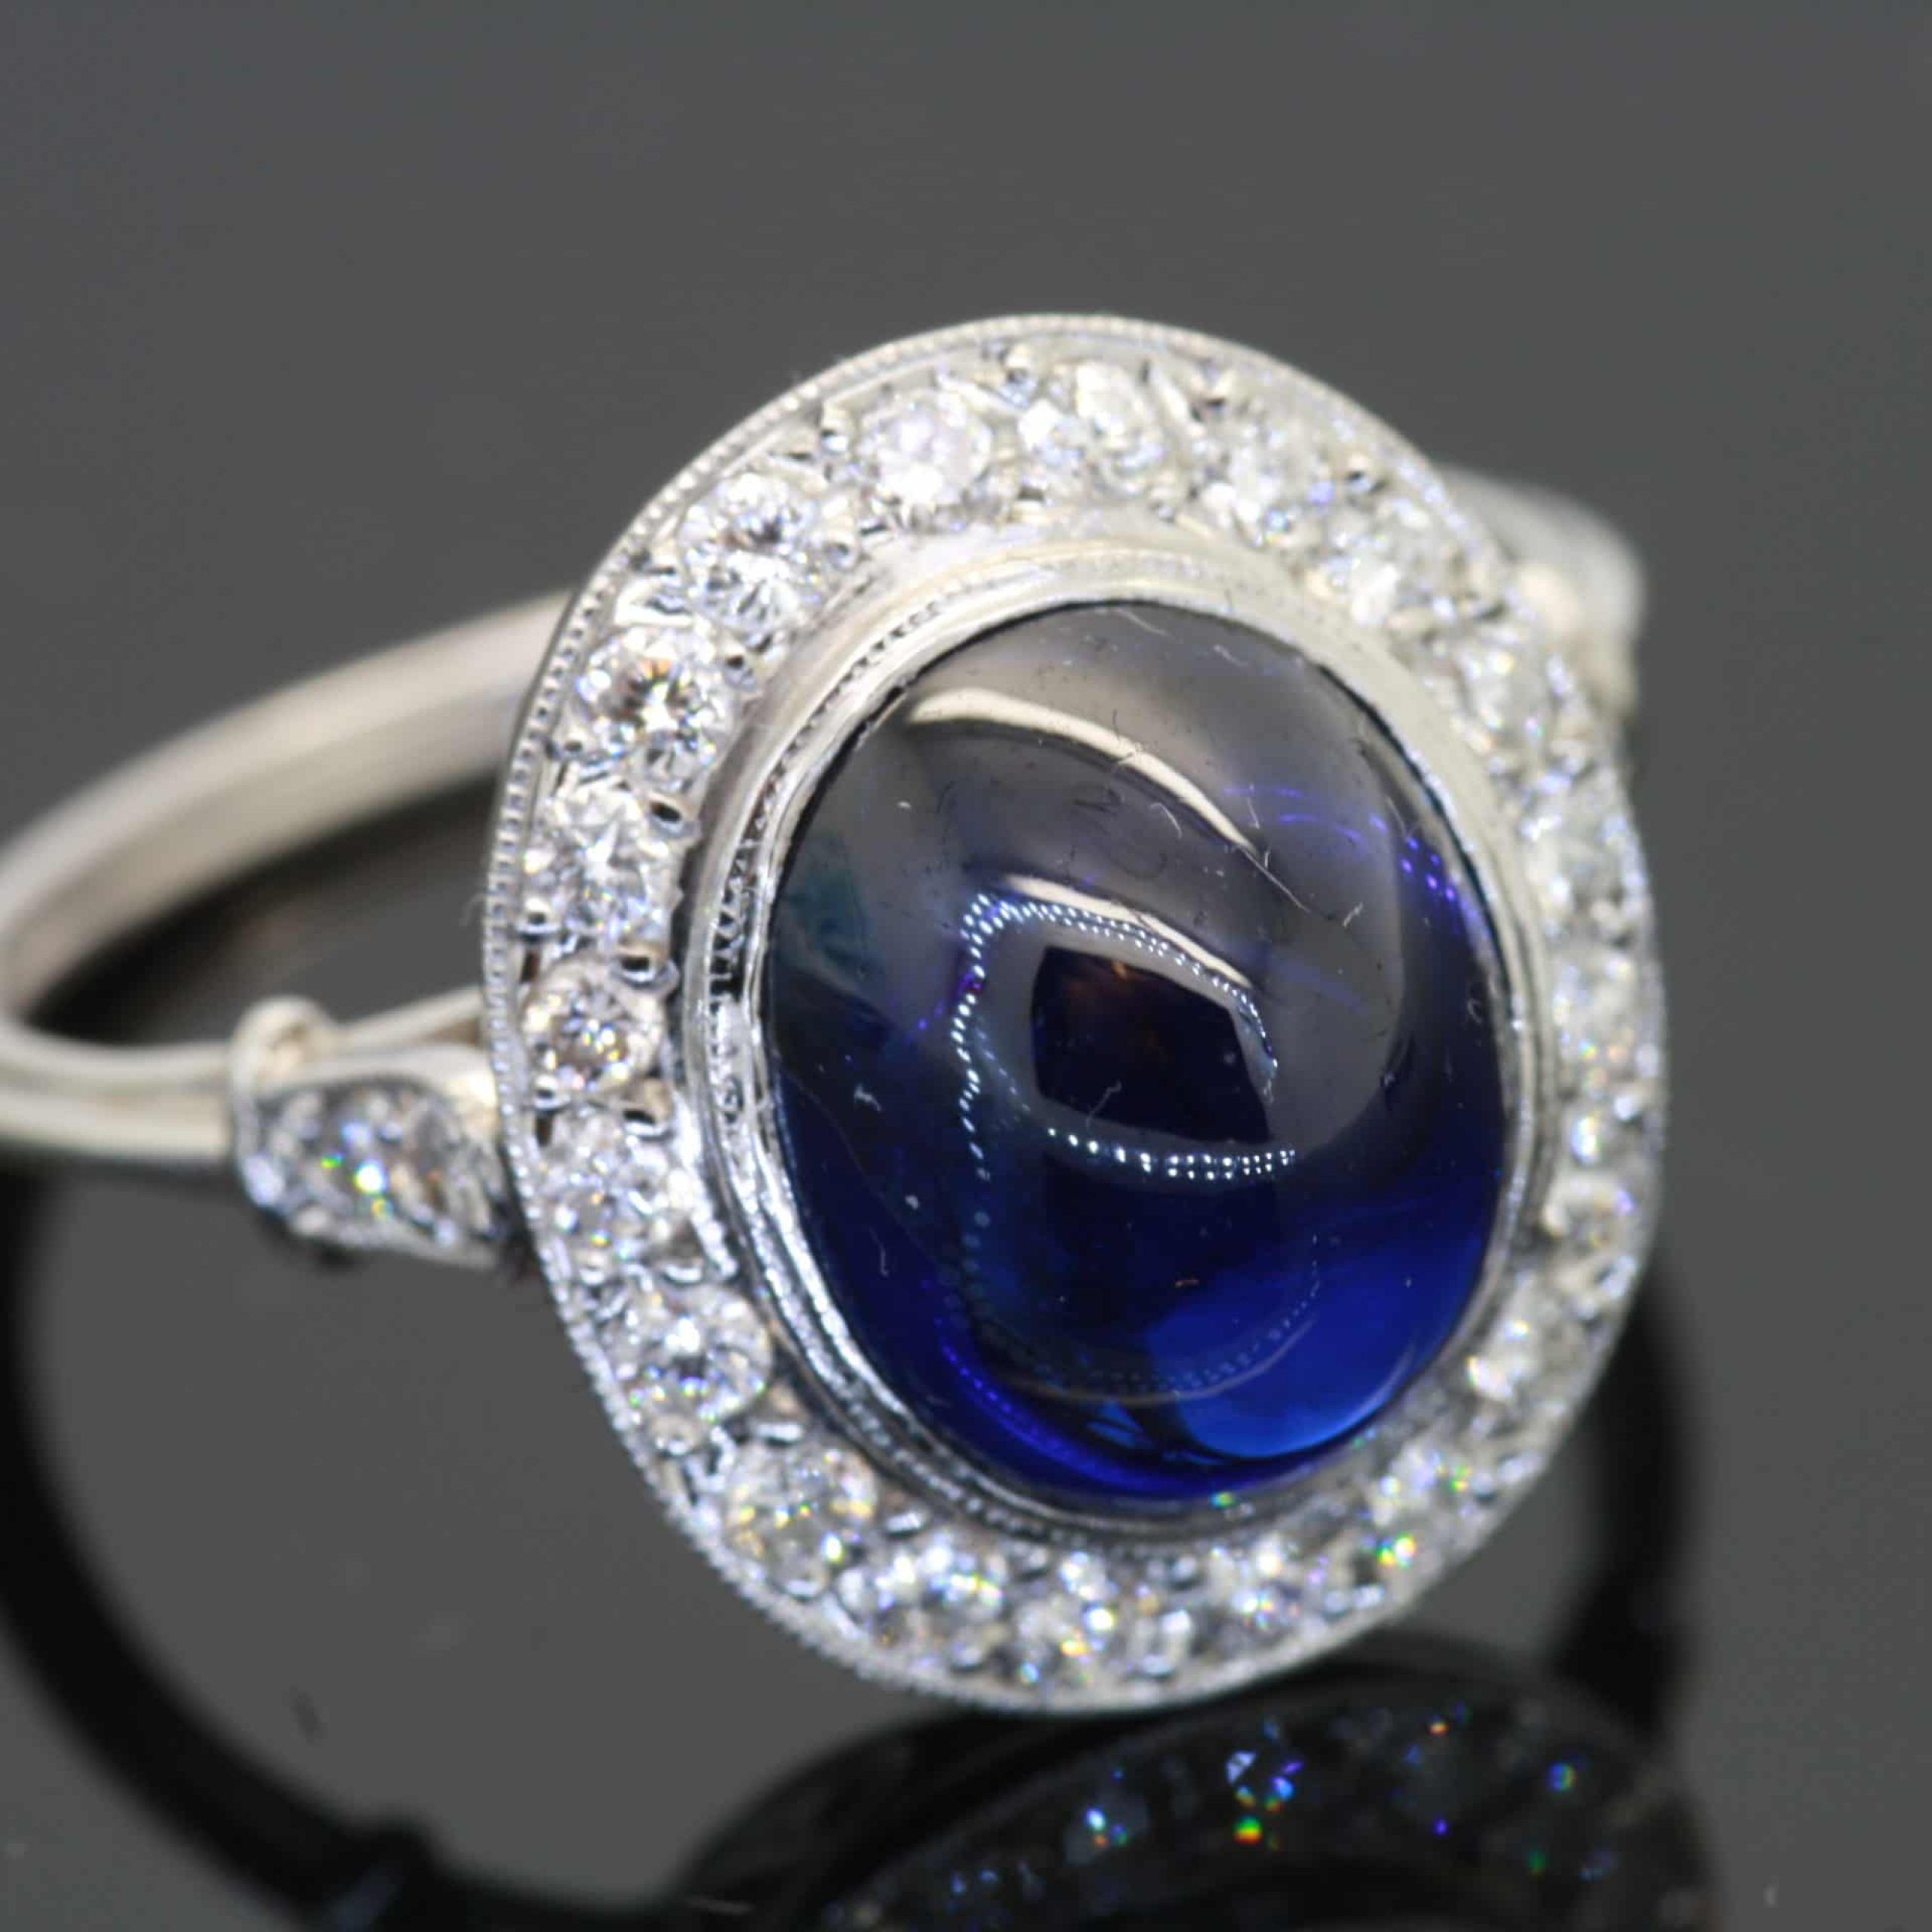 Cabochon Sapphire And Diamond Ring – Diamond Engagement Rings, Sapphire  Ruby And Emerald Jewellery From Weldons Of Dublin With Sapphire Cabochon And Diamond Rings (View 25 of 25)